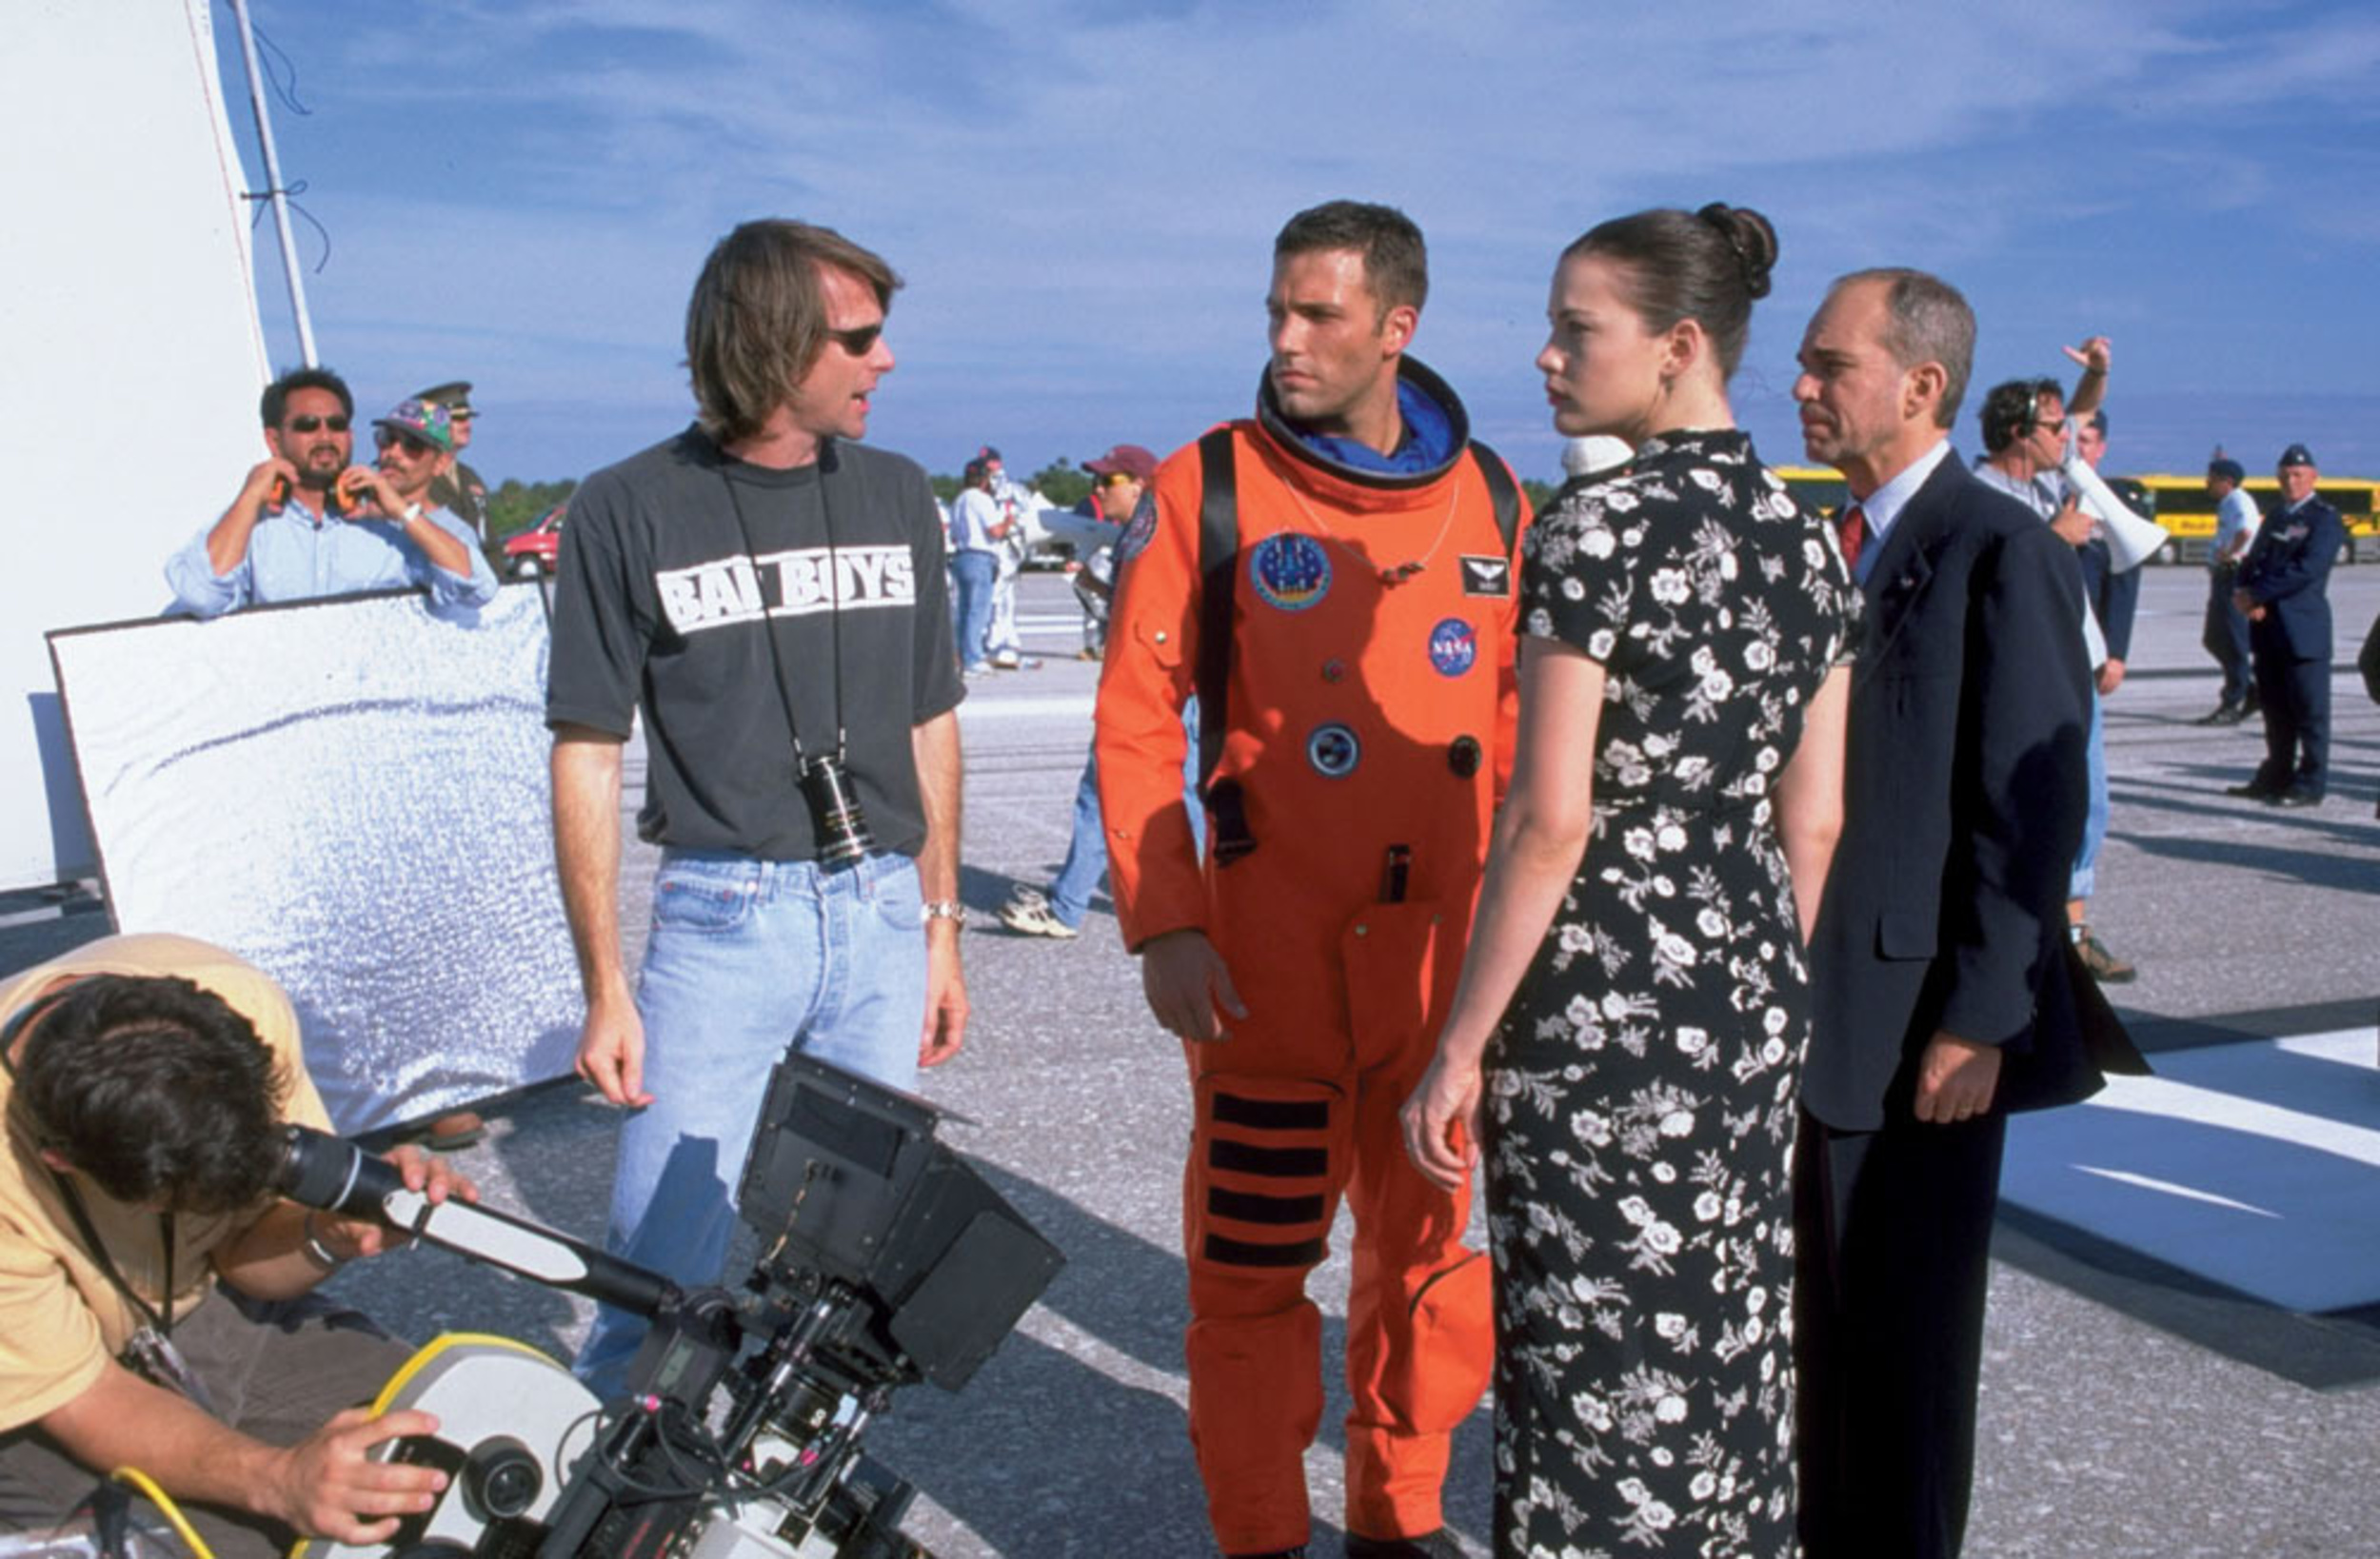 <p>The director makes an appearance as a NASA scientist, but he’s not the only cameo in the film. Real-life astronaut Shannon Lucid makes a brief background cameo in the movie as well.</p>